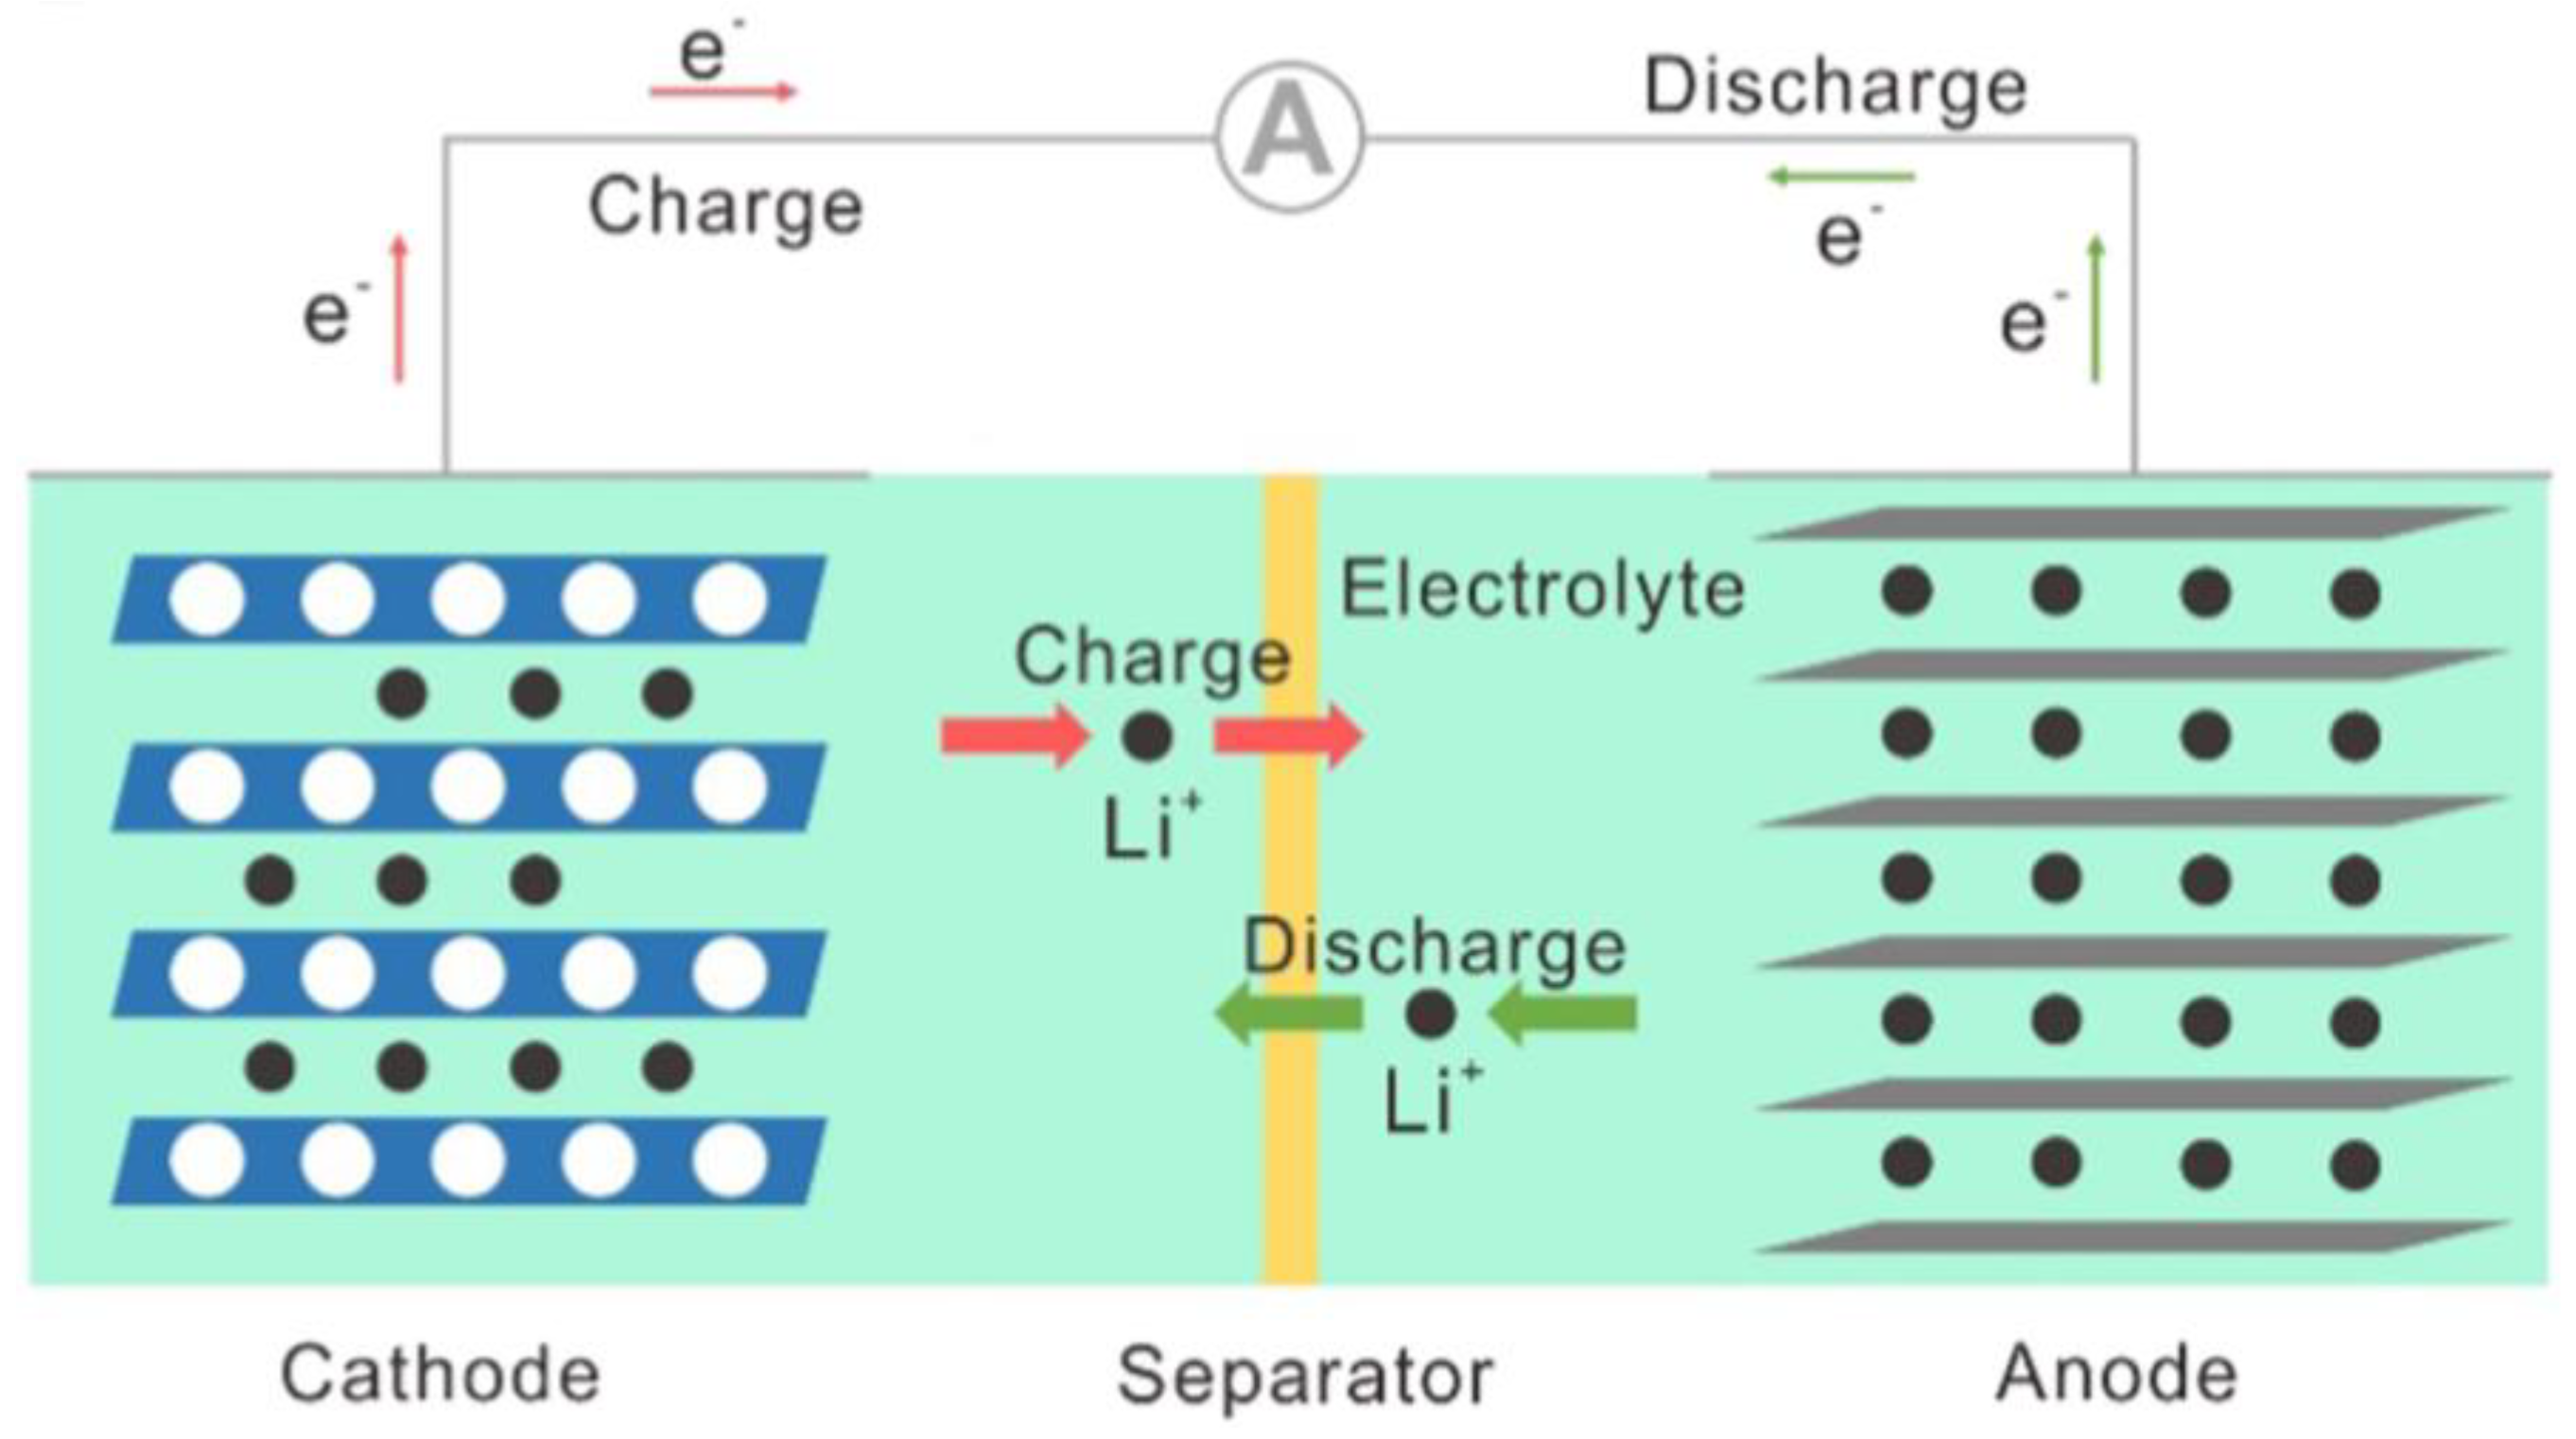 Resting boosts performance of lithium metal batteries